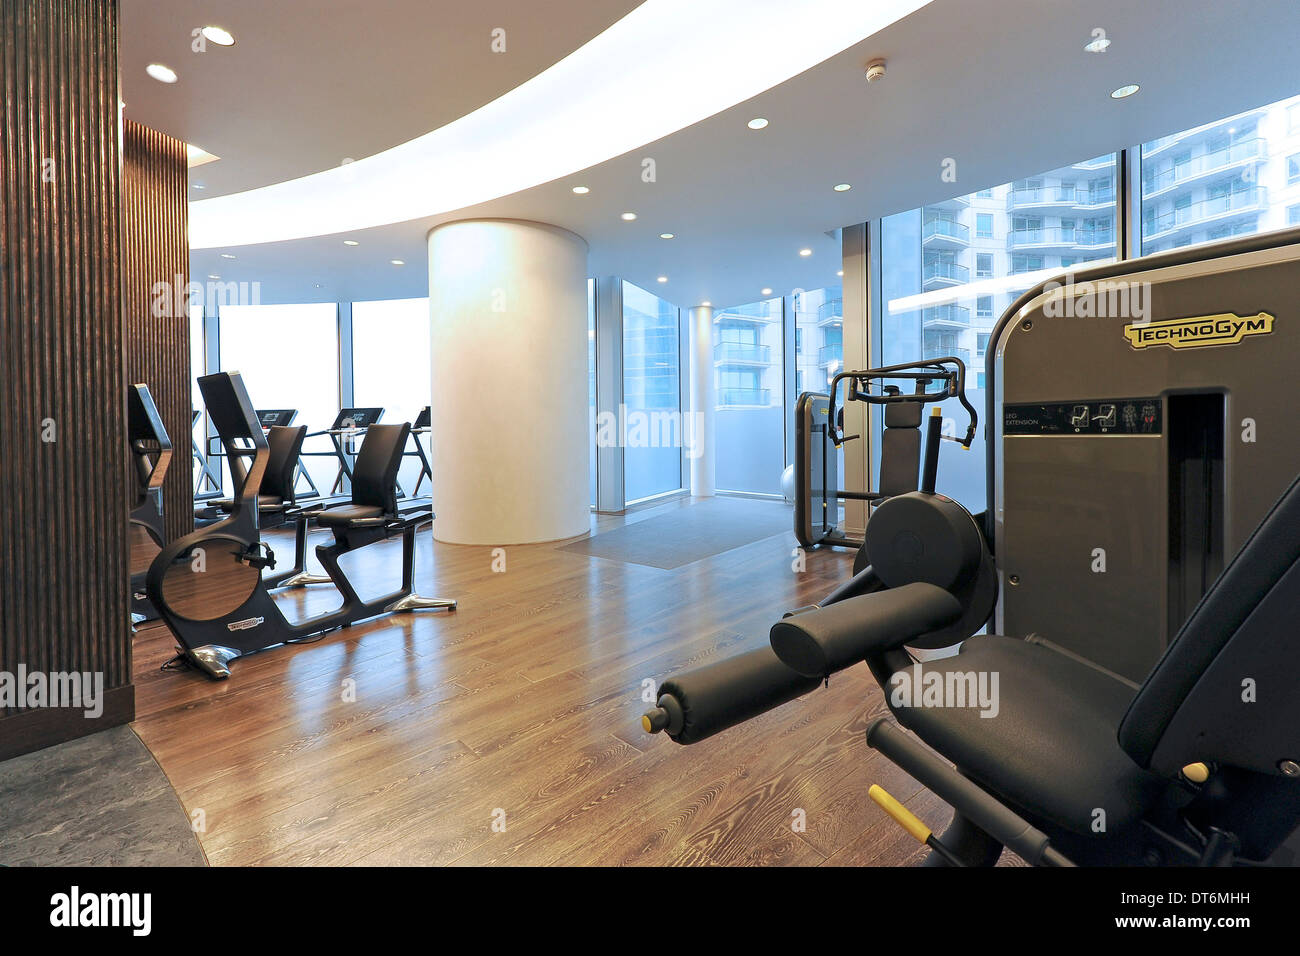 Gym inside St Georges Wharf Tower Stock Photo